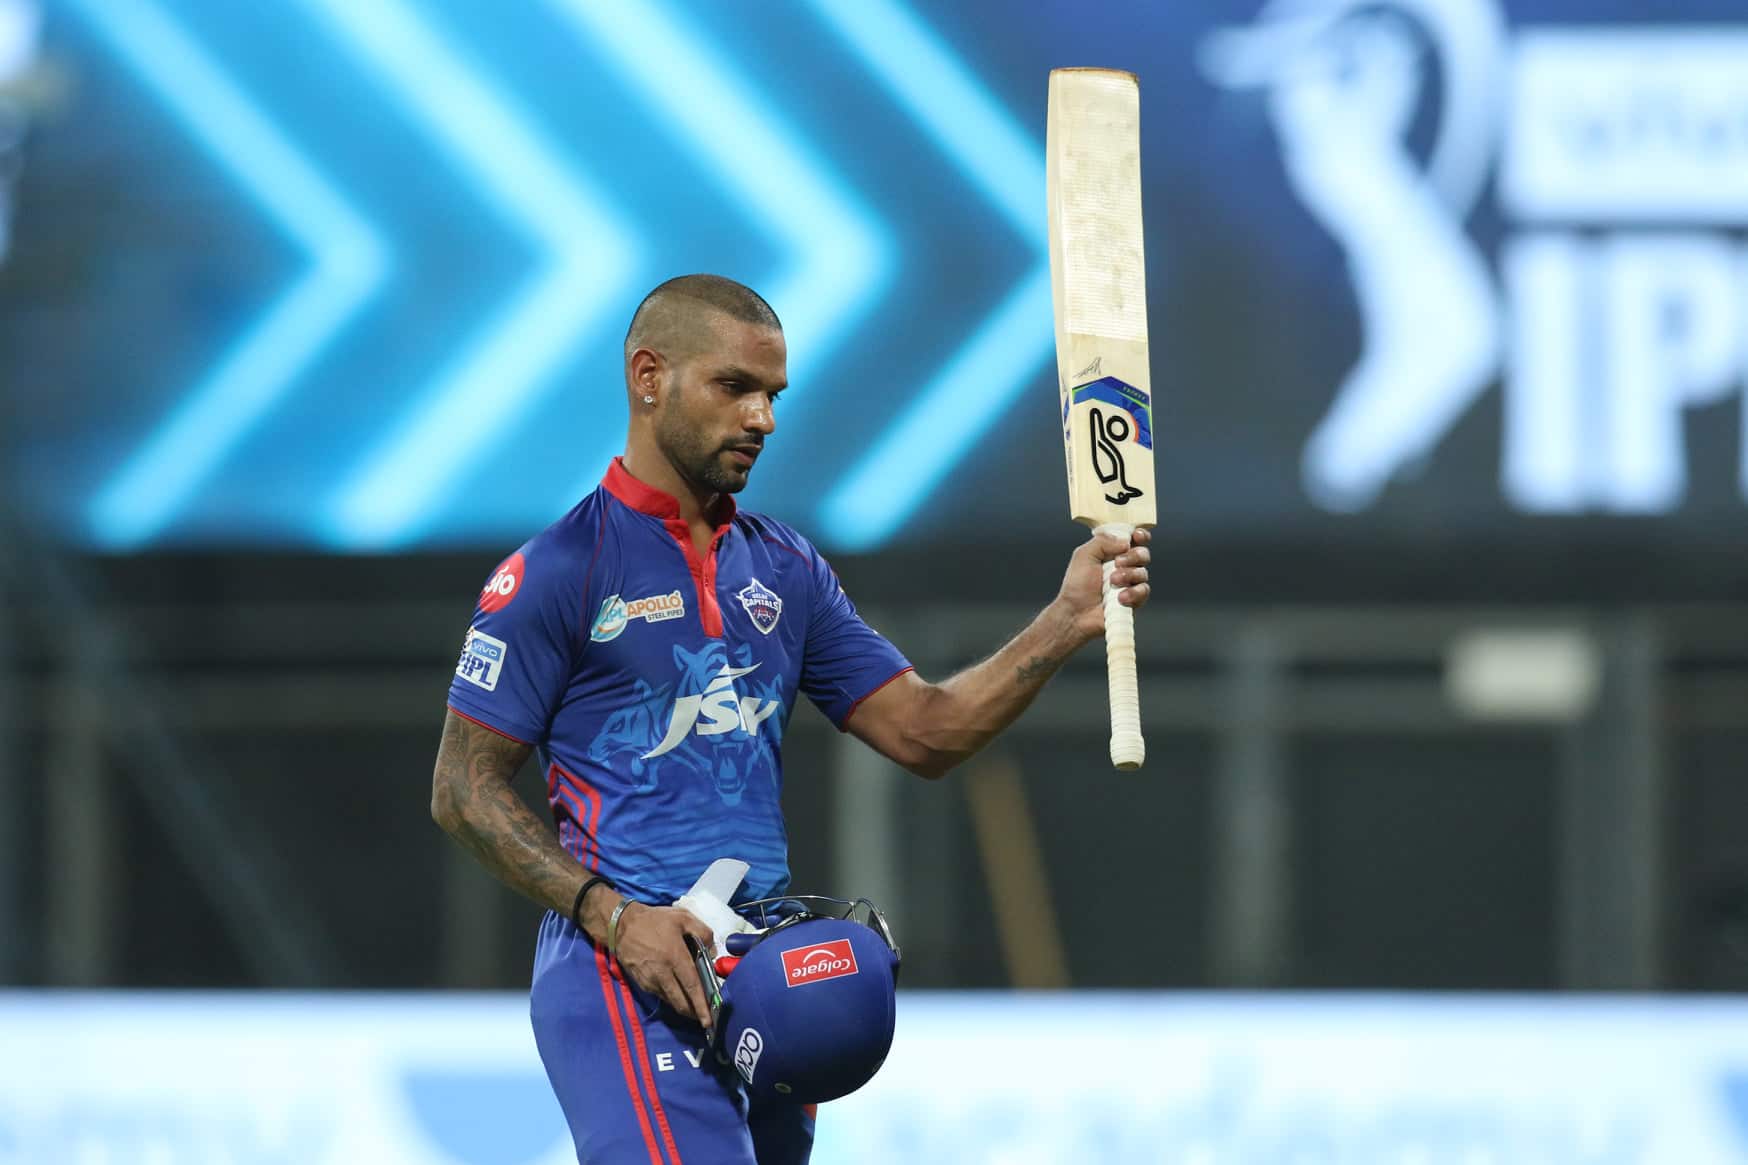 Delhi Capitals opener Shikhar Dhawan after completing a fifty against Punjab Kings in the IPL 2021 match in Mumbai. (Photo: IPL)